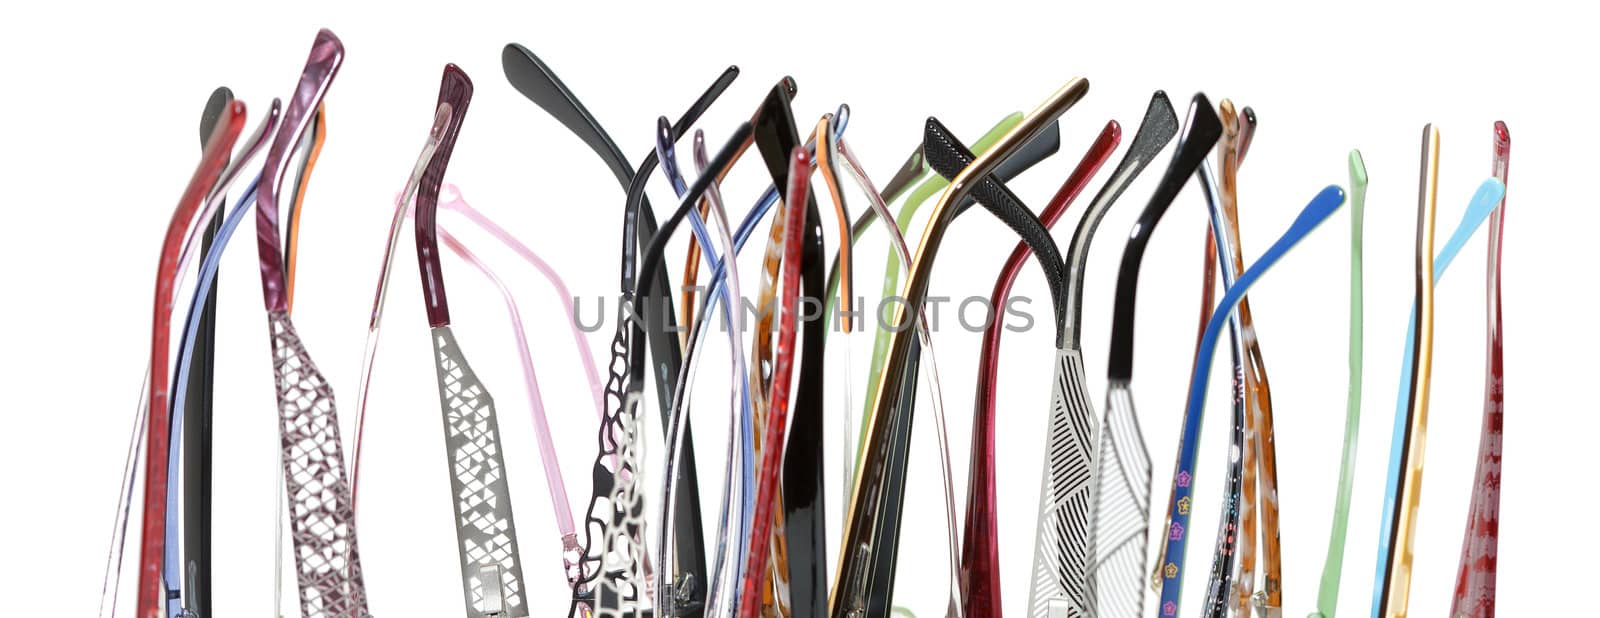 a lot of earpiece glasses by Discovod